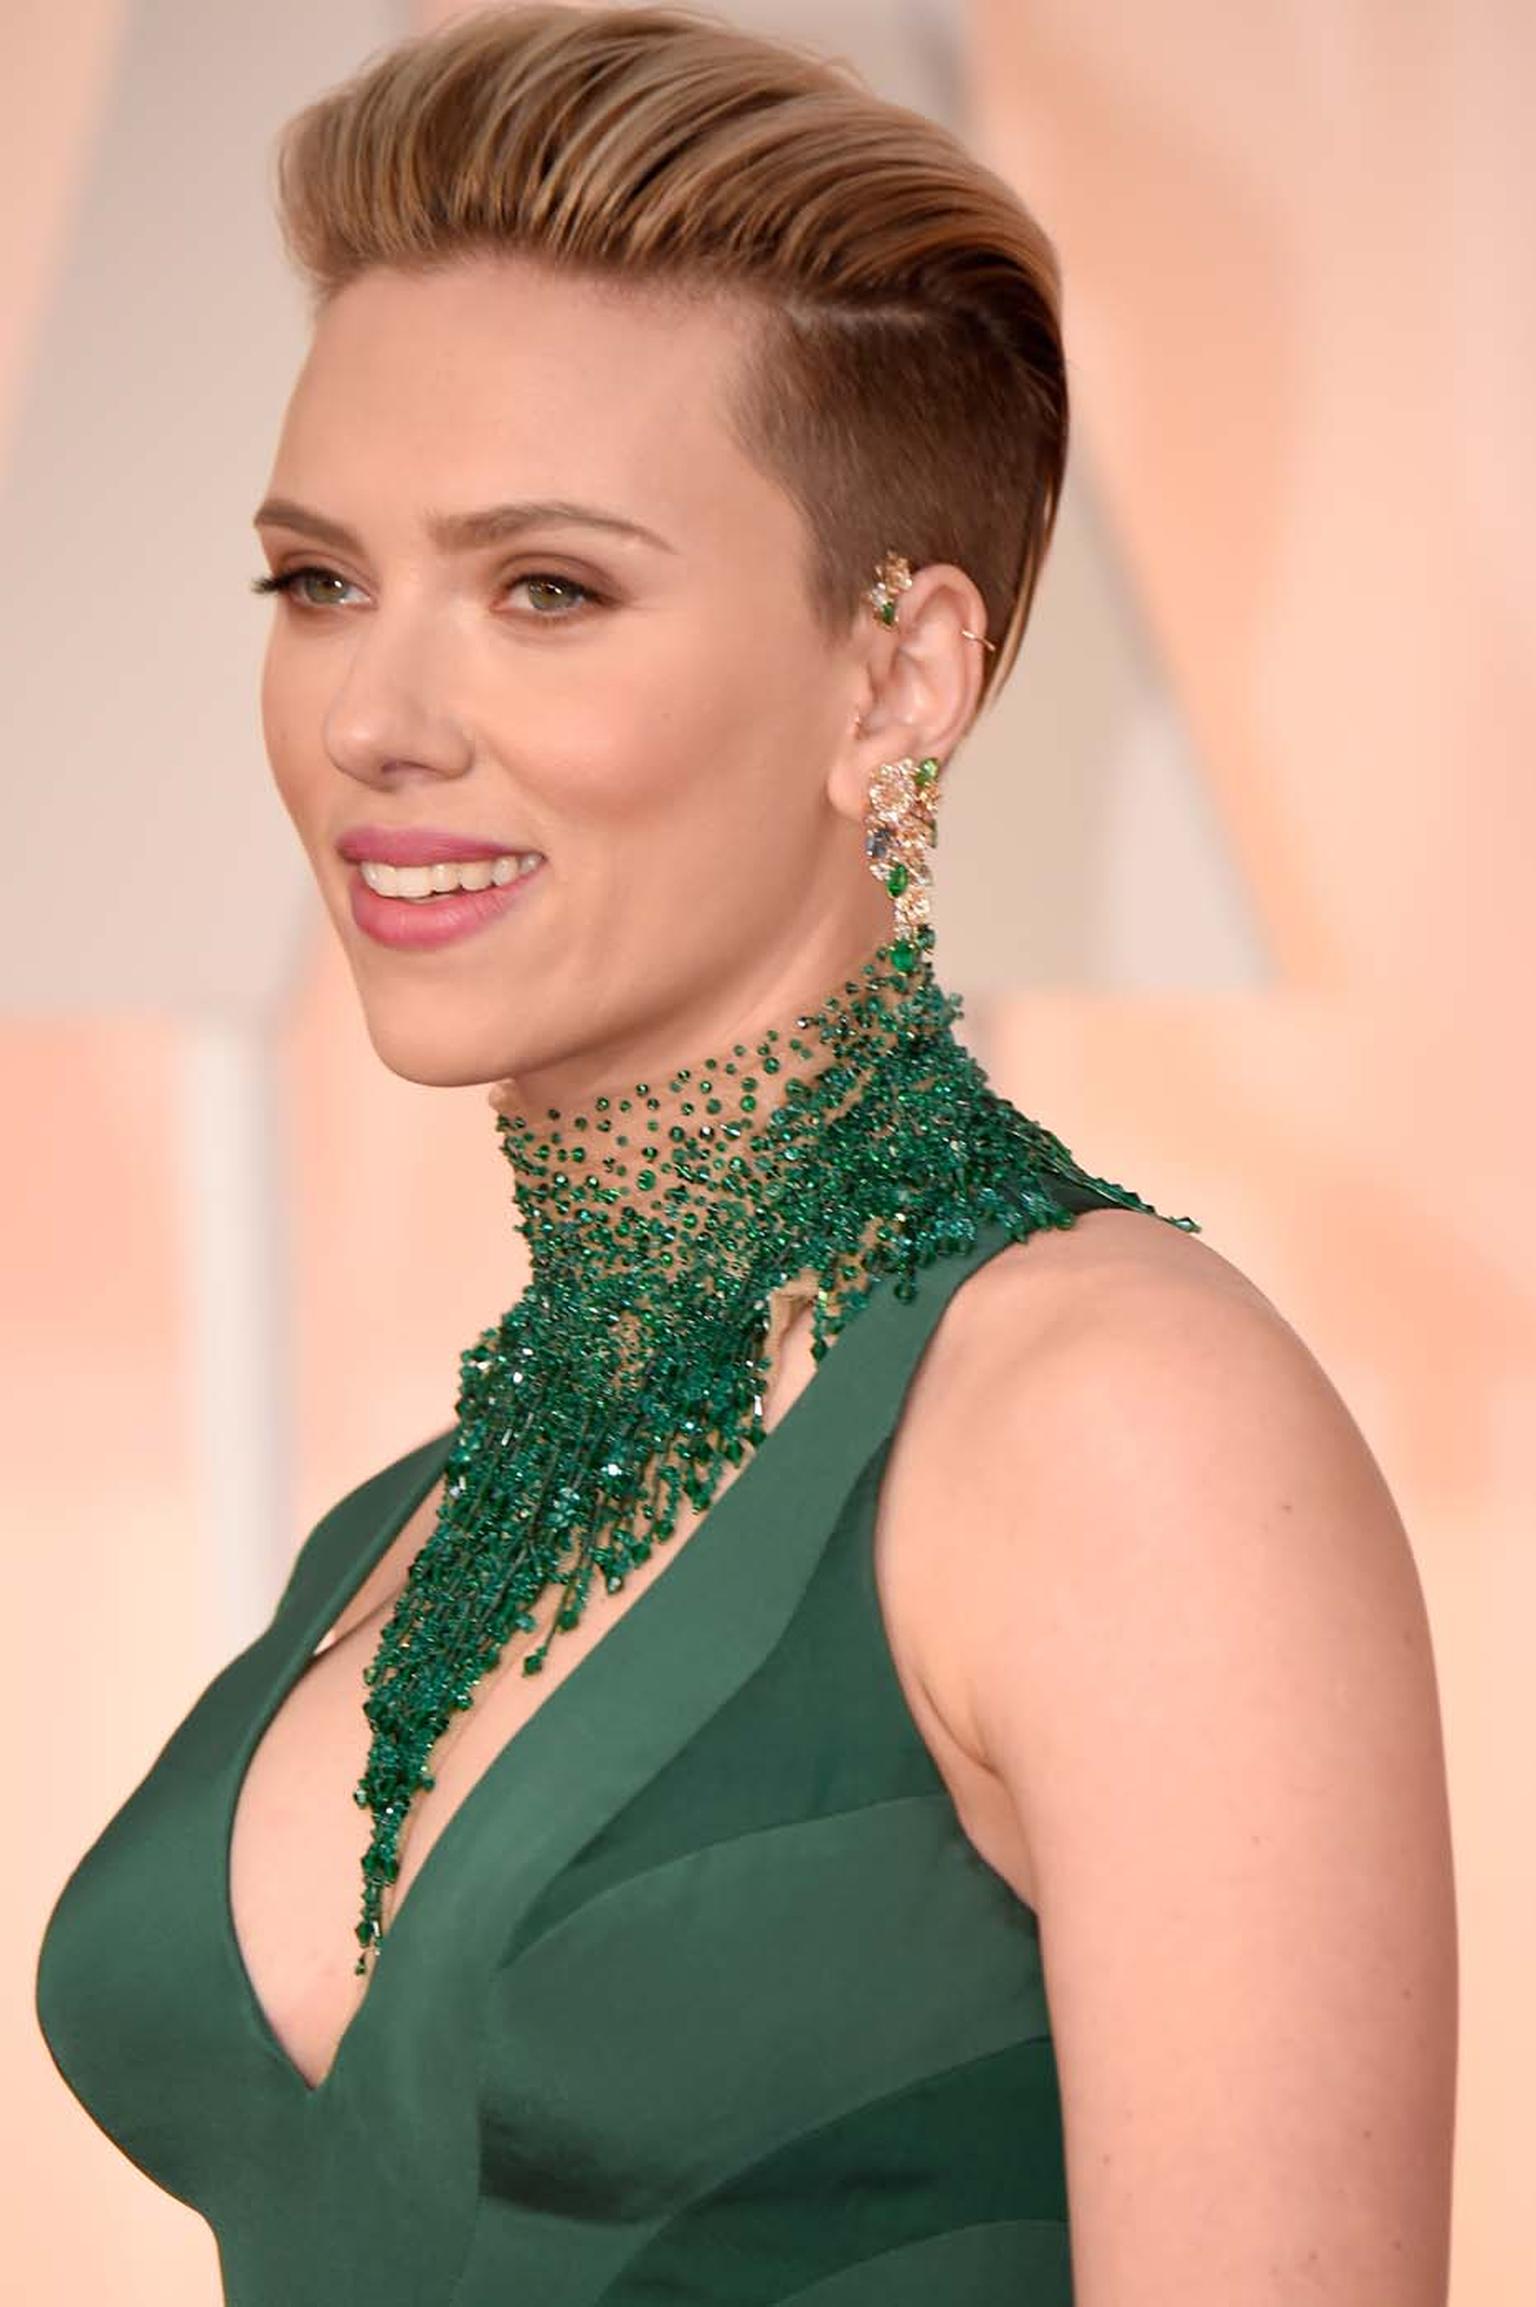 Actress Scarlett Johansson wowed the crowds with her red carpet jewelry, opting to accessorize her emerald green Atelier Versace gown, complete with dramatic Swarovski beaded collar, with a pair of mismatched earrings, ultra-modern Piaget Mediterranean Ga